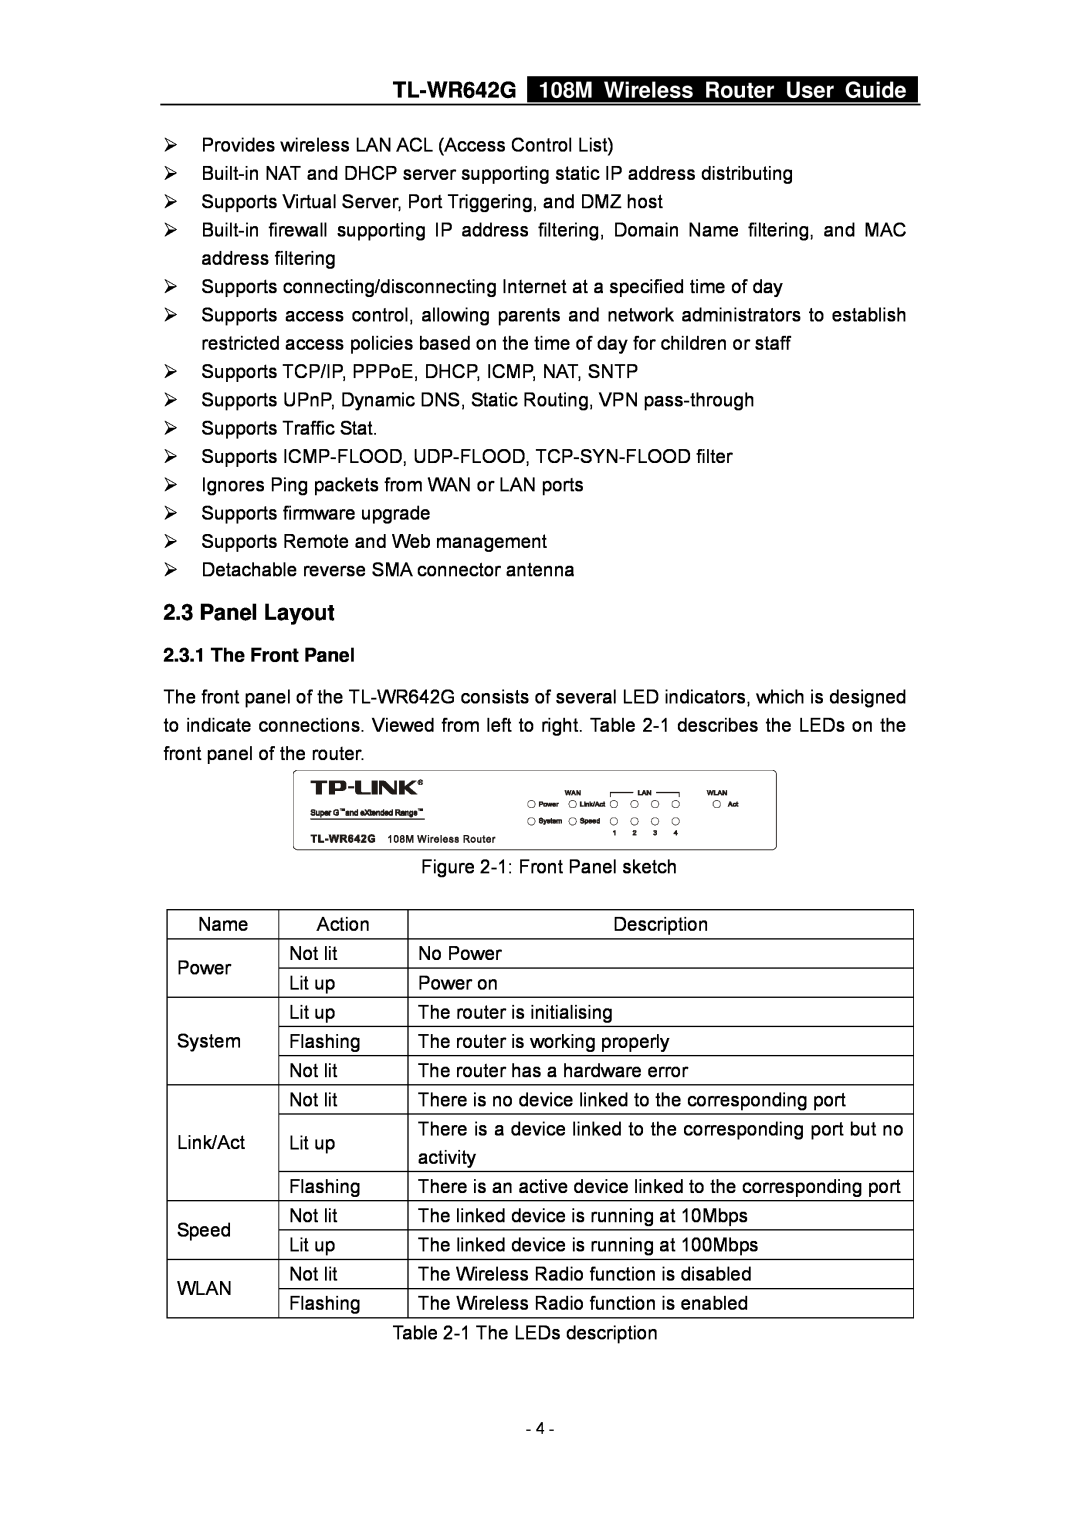 TP-Link manual Panel Layout, The Front Panel, TL-WR642G 108M Wireless Router User Guide 